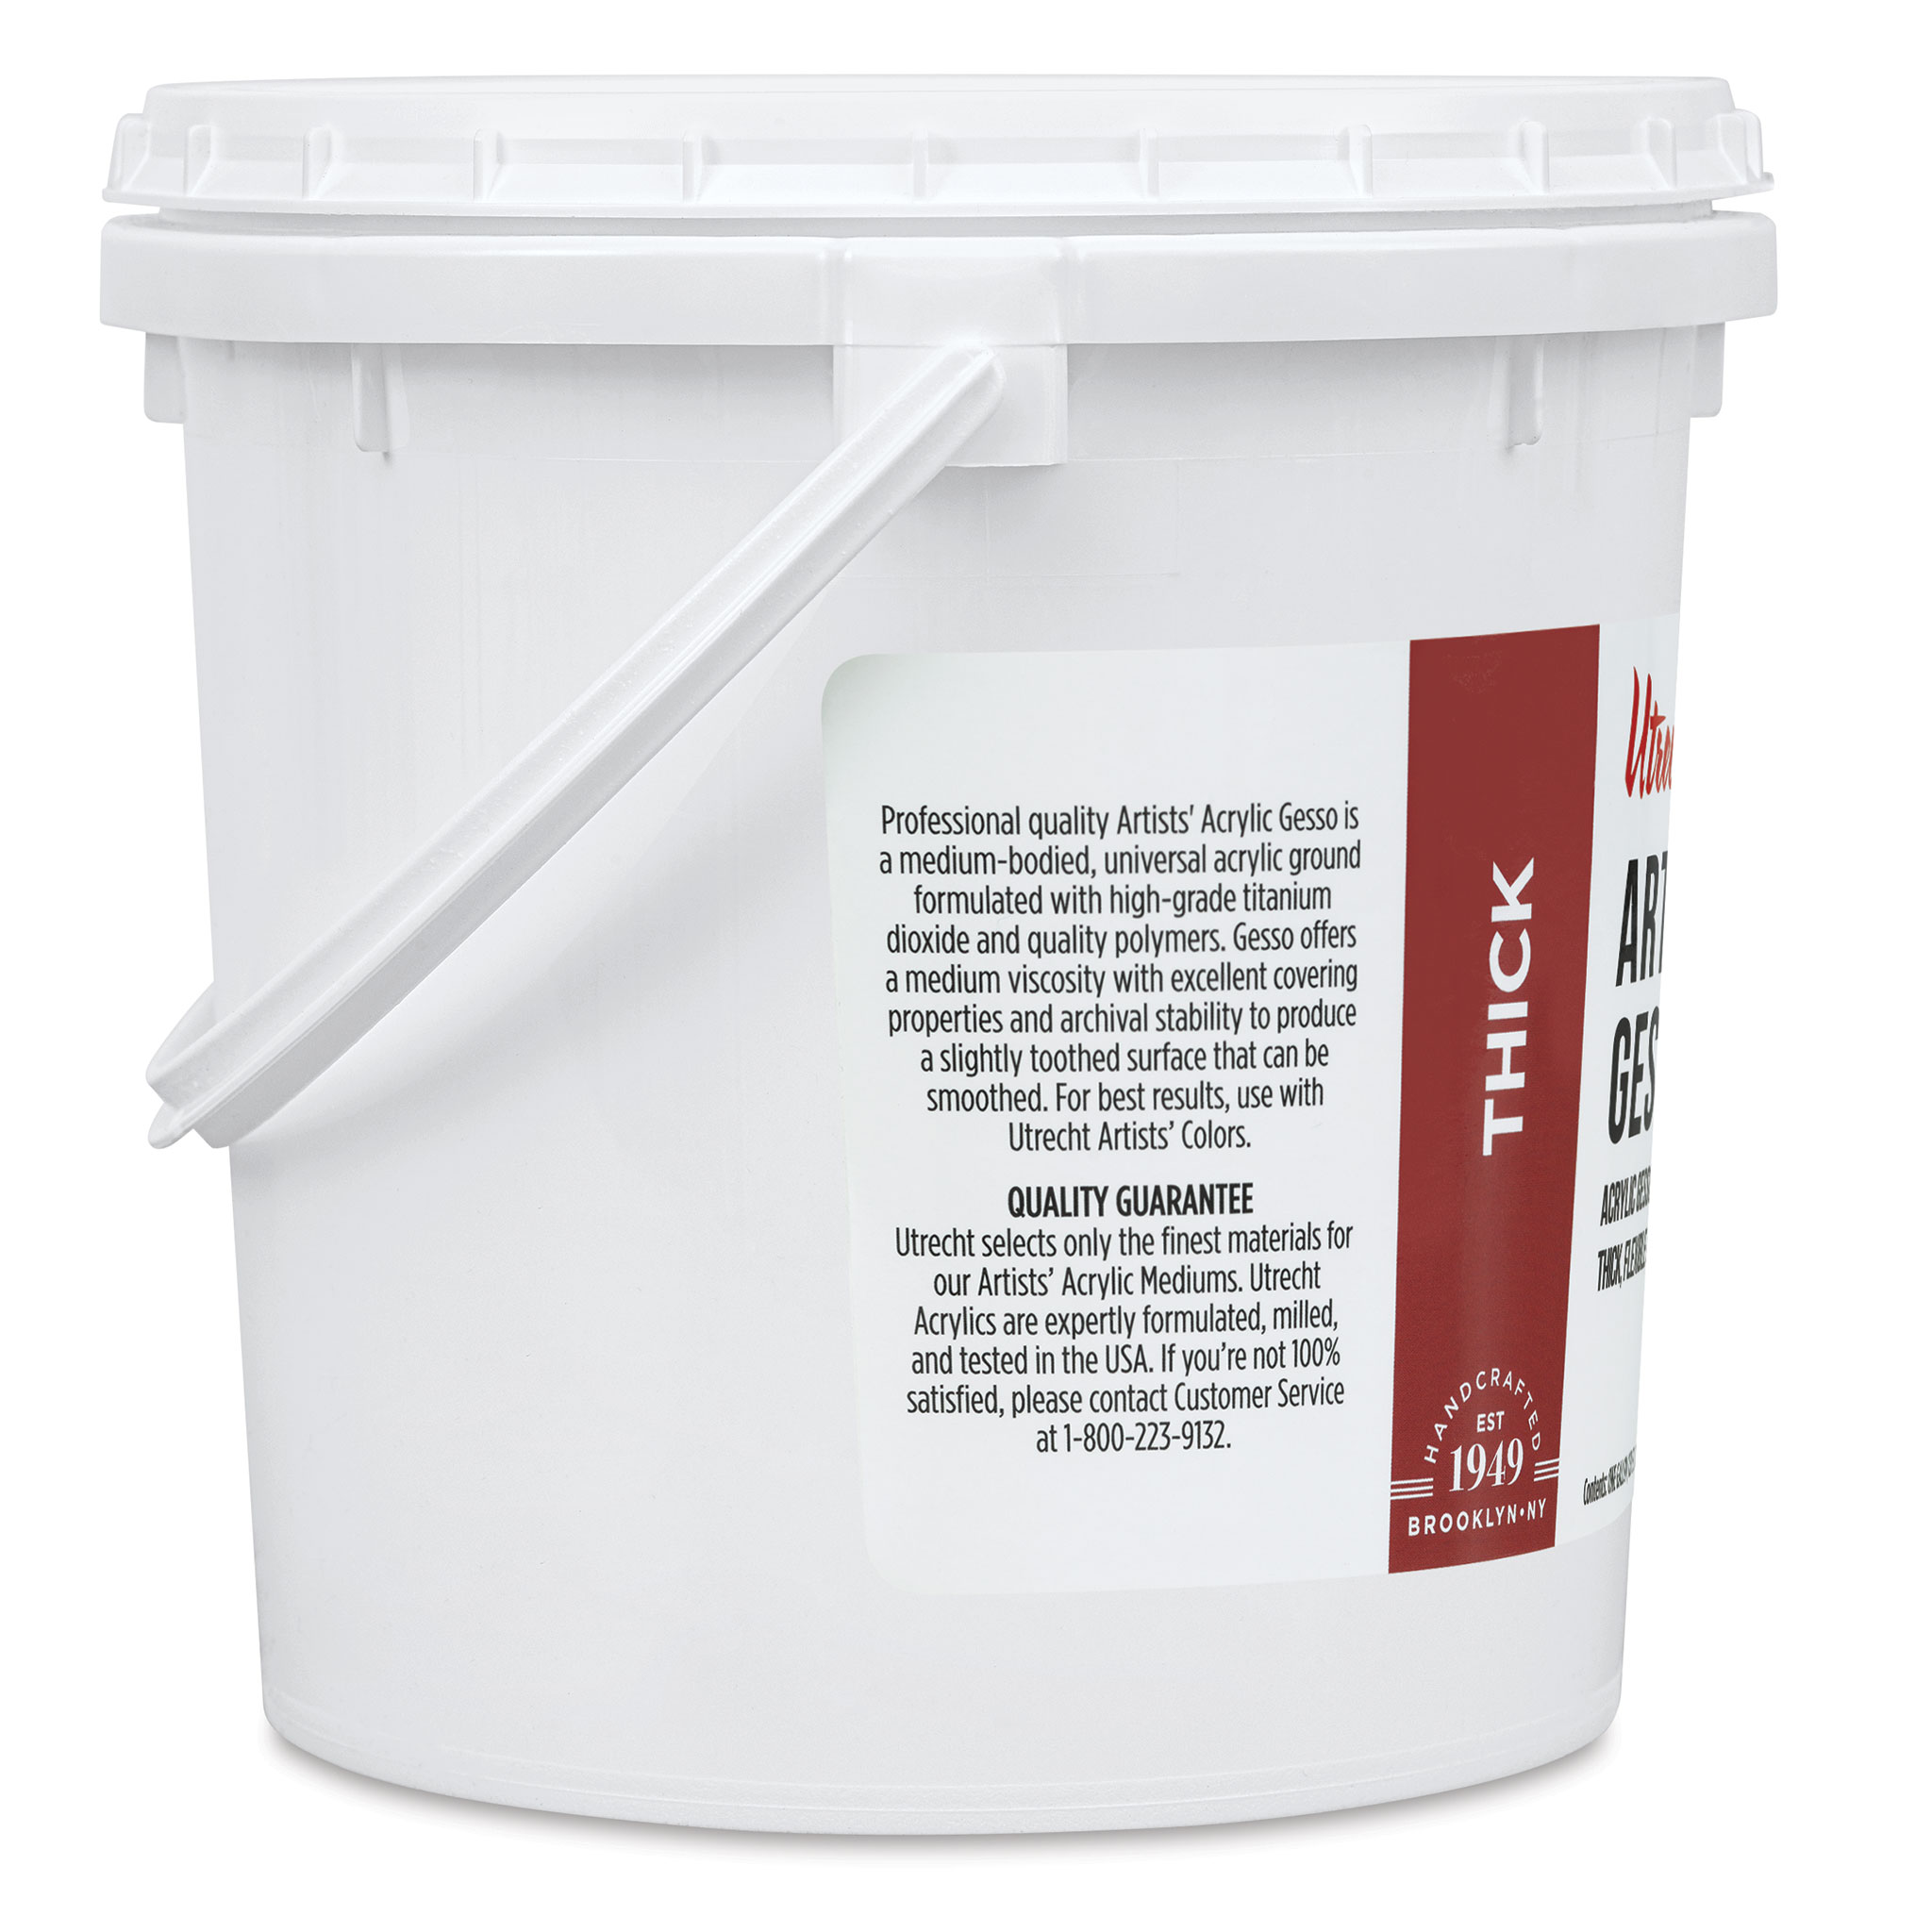 New York Central Acrylic Gesso - White Professional Grade Gesso for  Painting, Acrylic, Oil, Pastels, & More! - GAllon Tub